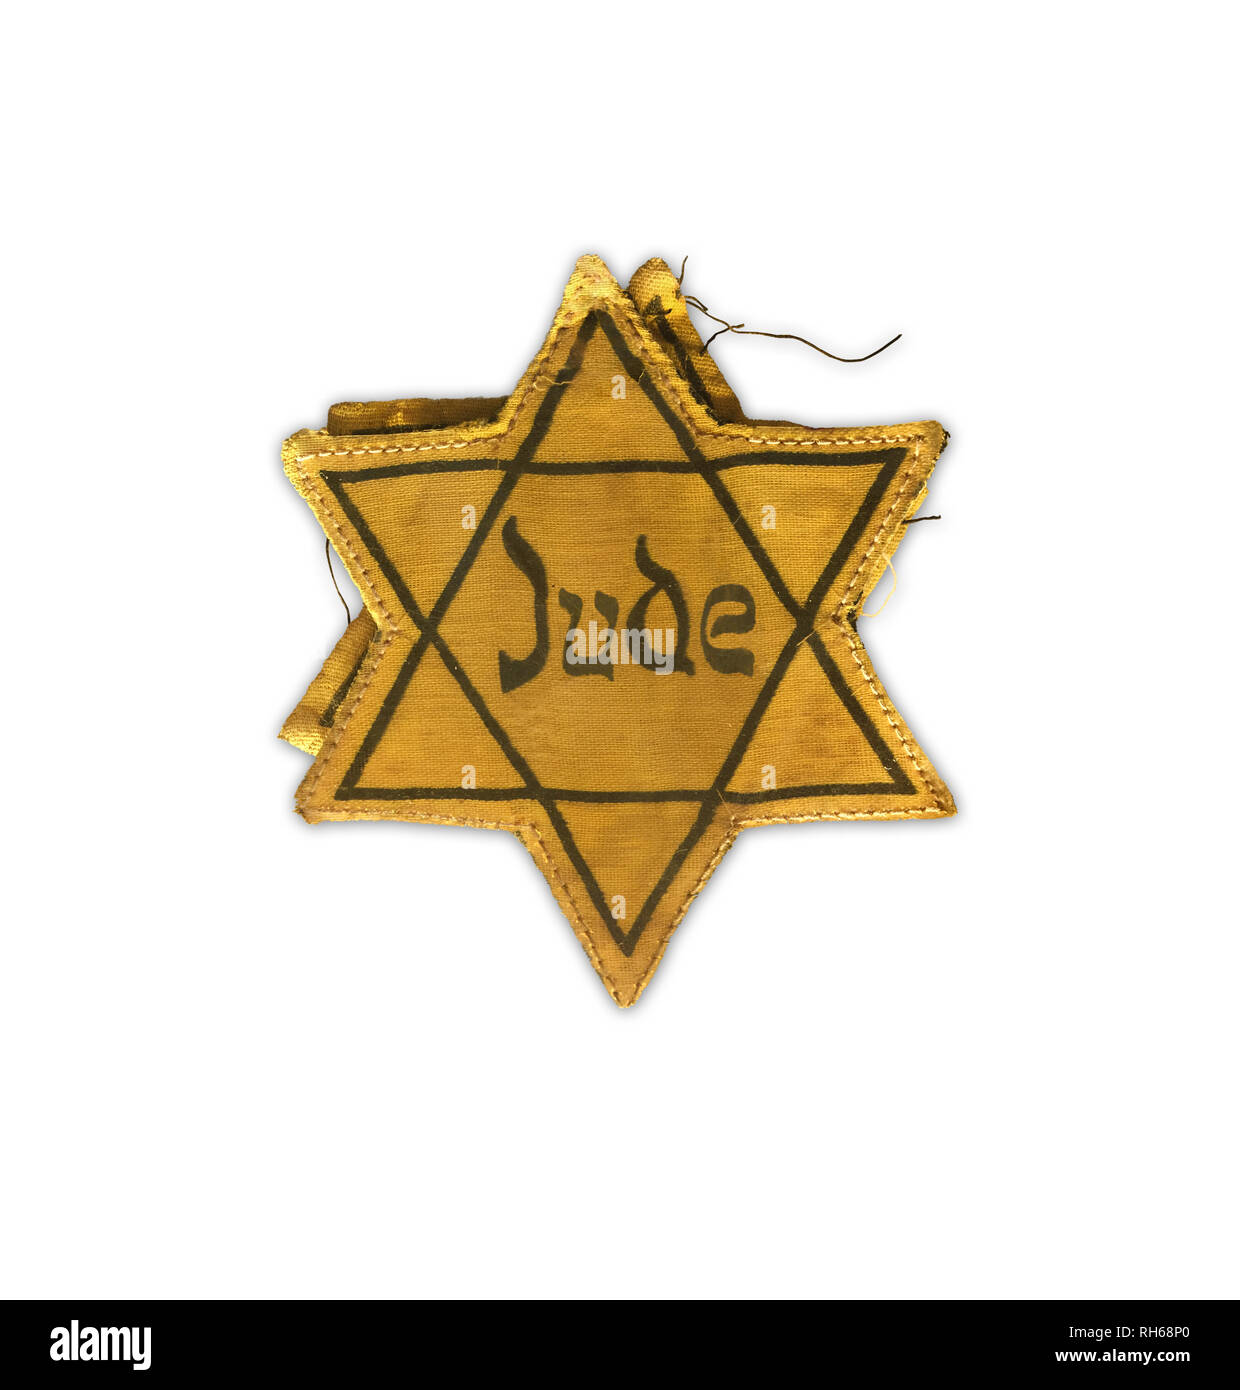 Hollocaust remembrance day, yellow star on white background. The word Jude means Jew in German. Stock Photo